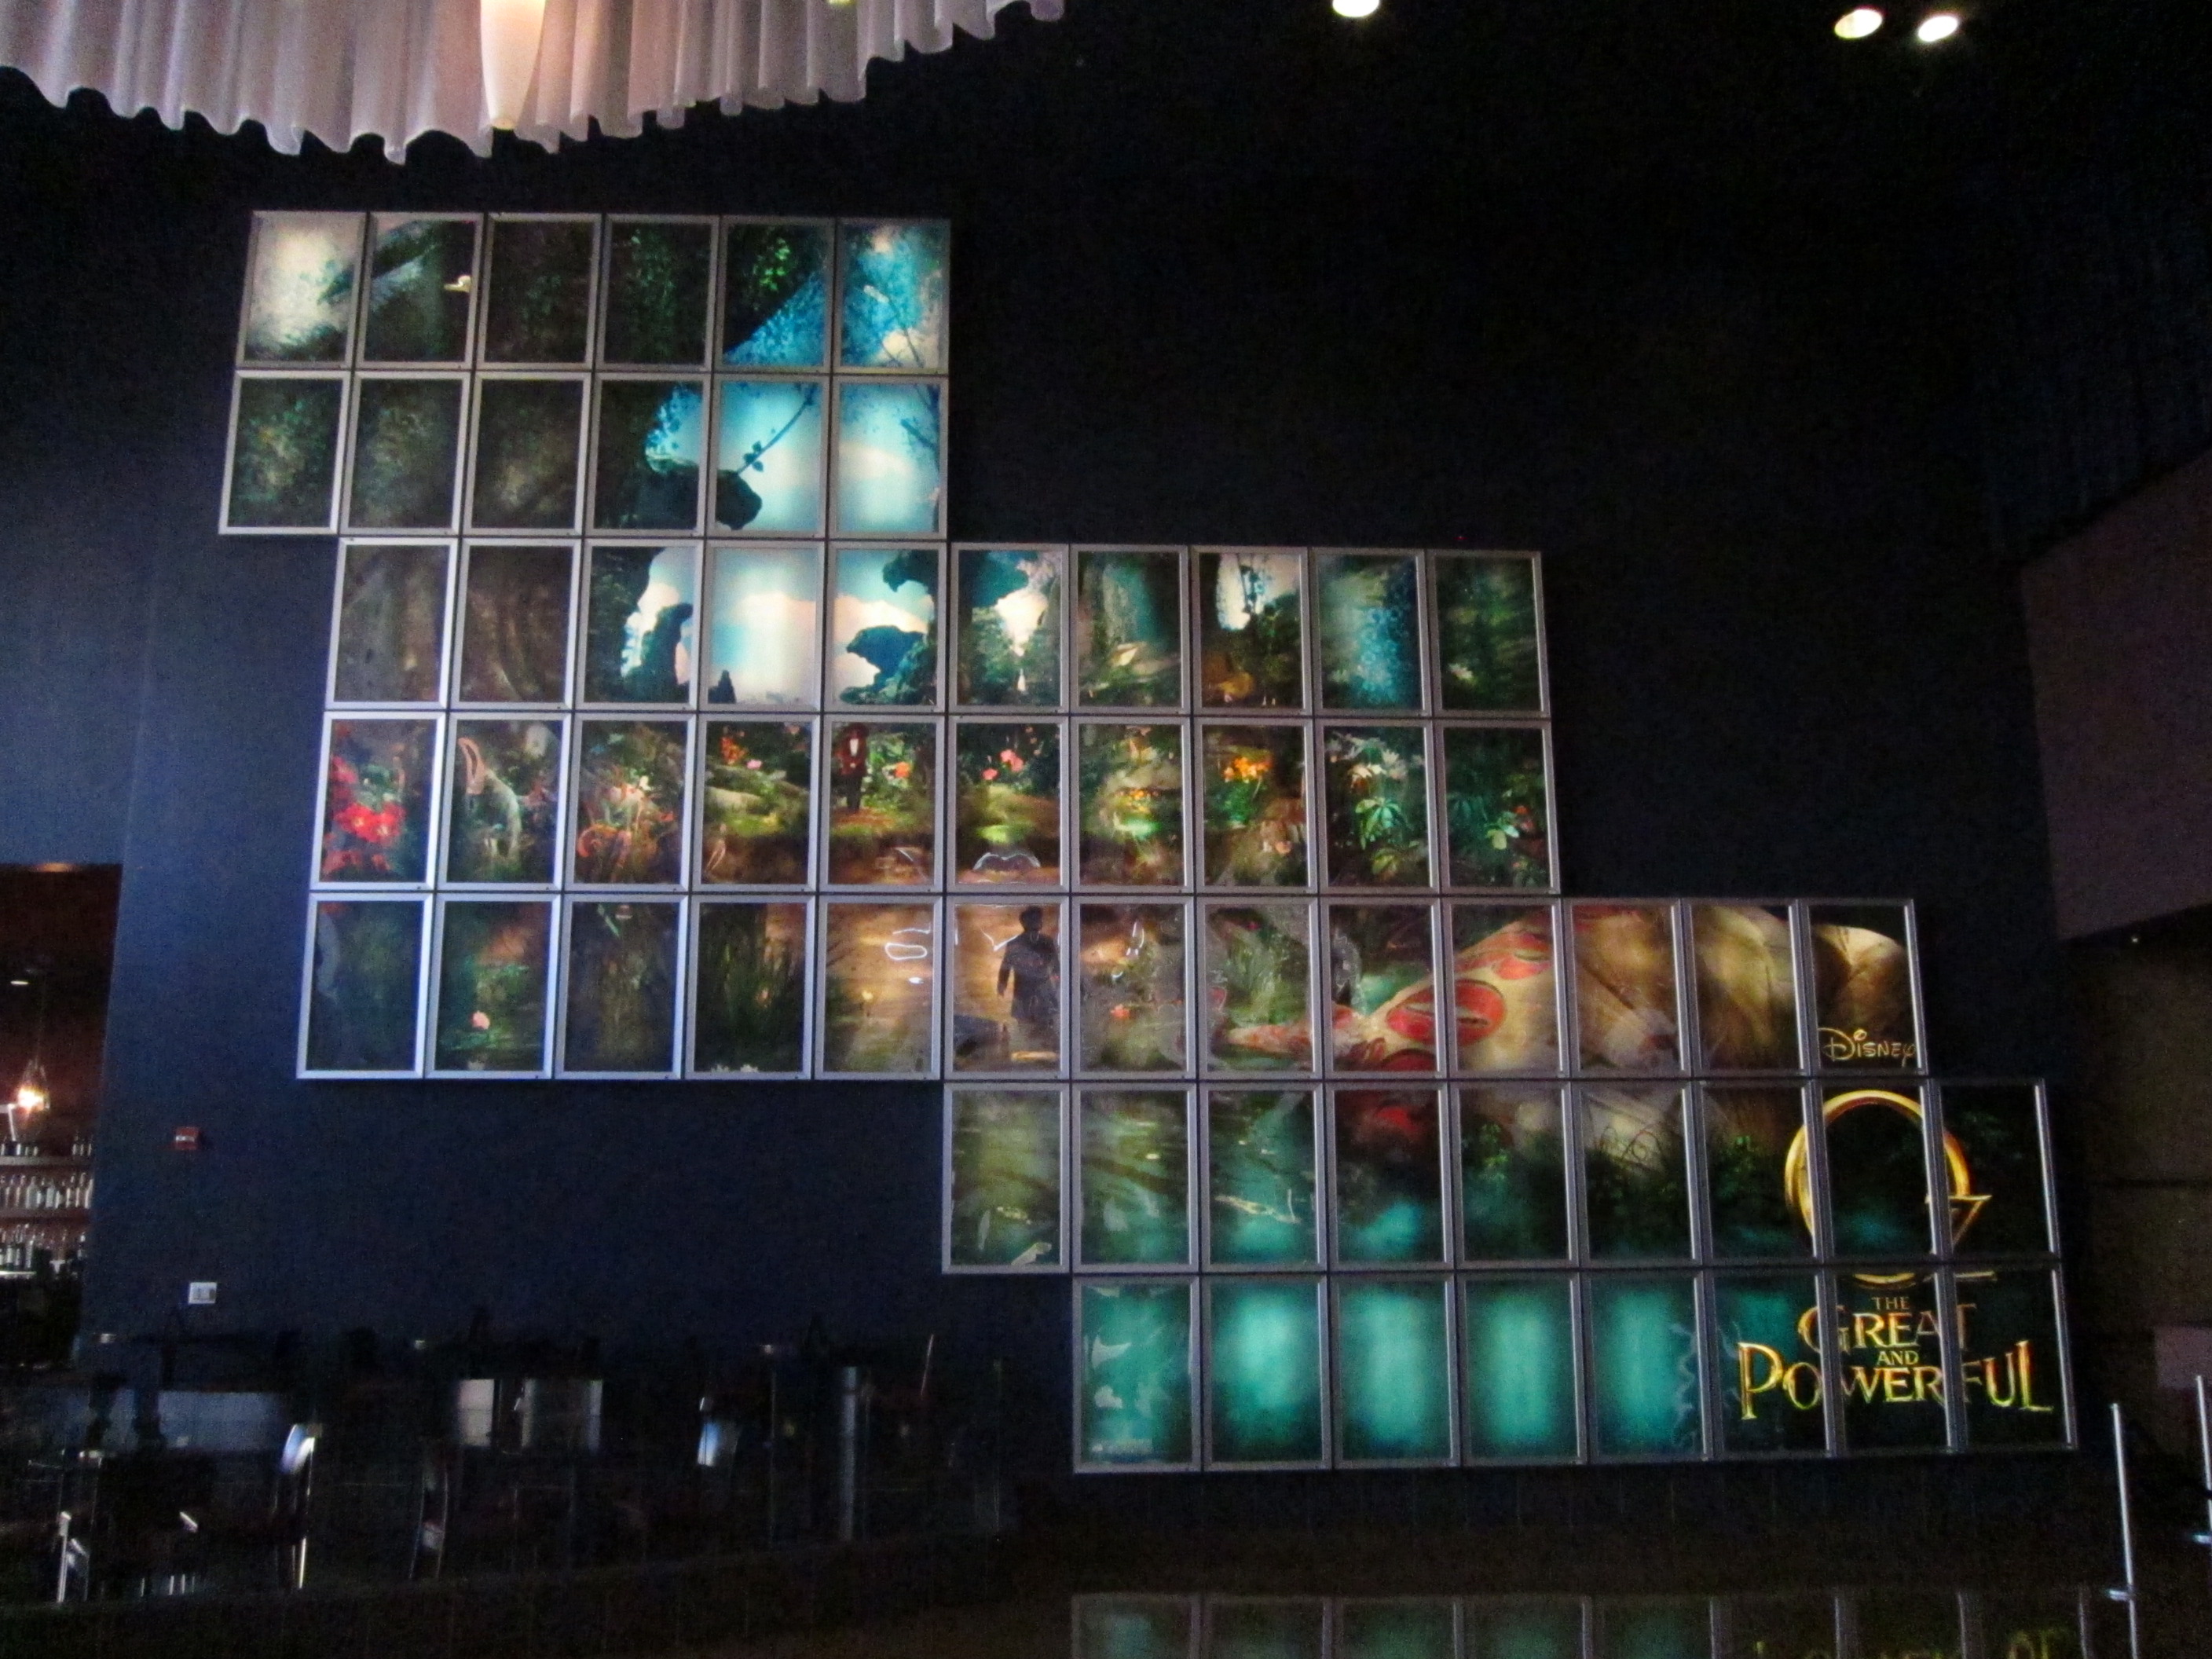 Backlit wall for Disney's OZ THE GREAT AND POWERFUL at the ArcLight Pasadena.